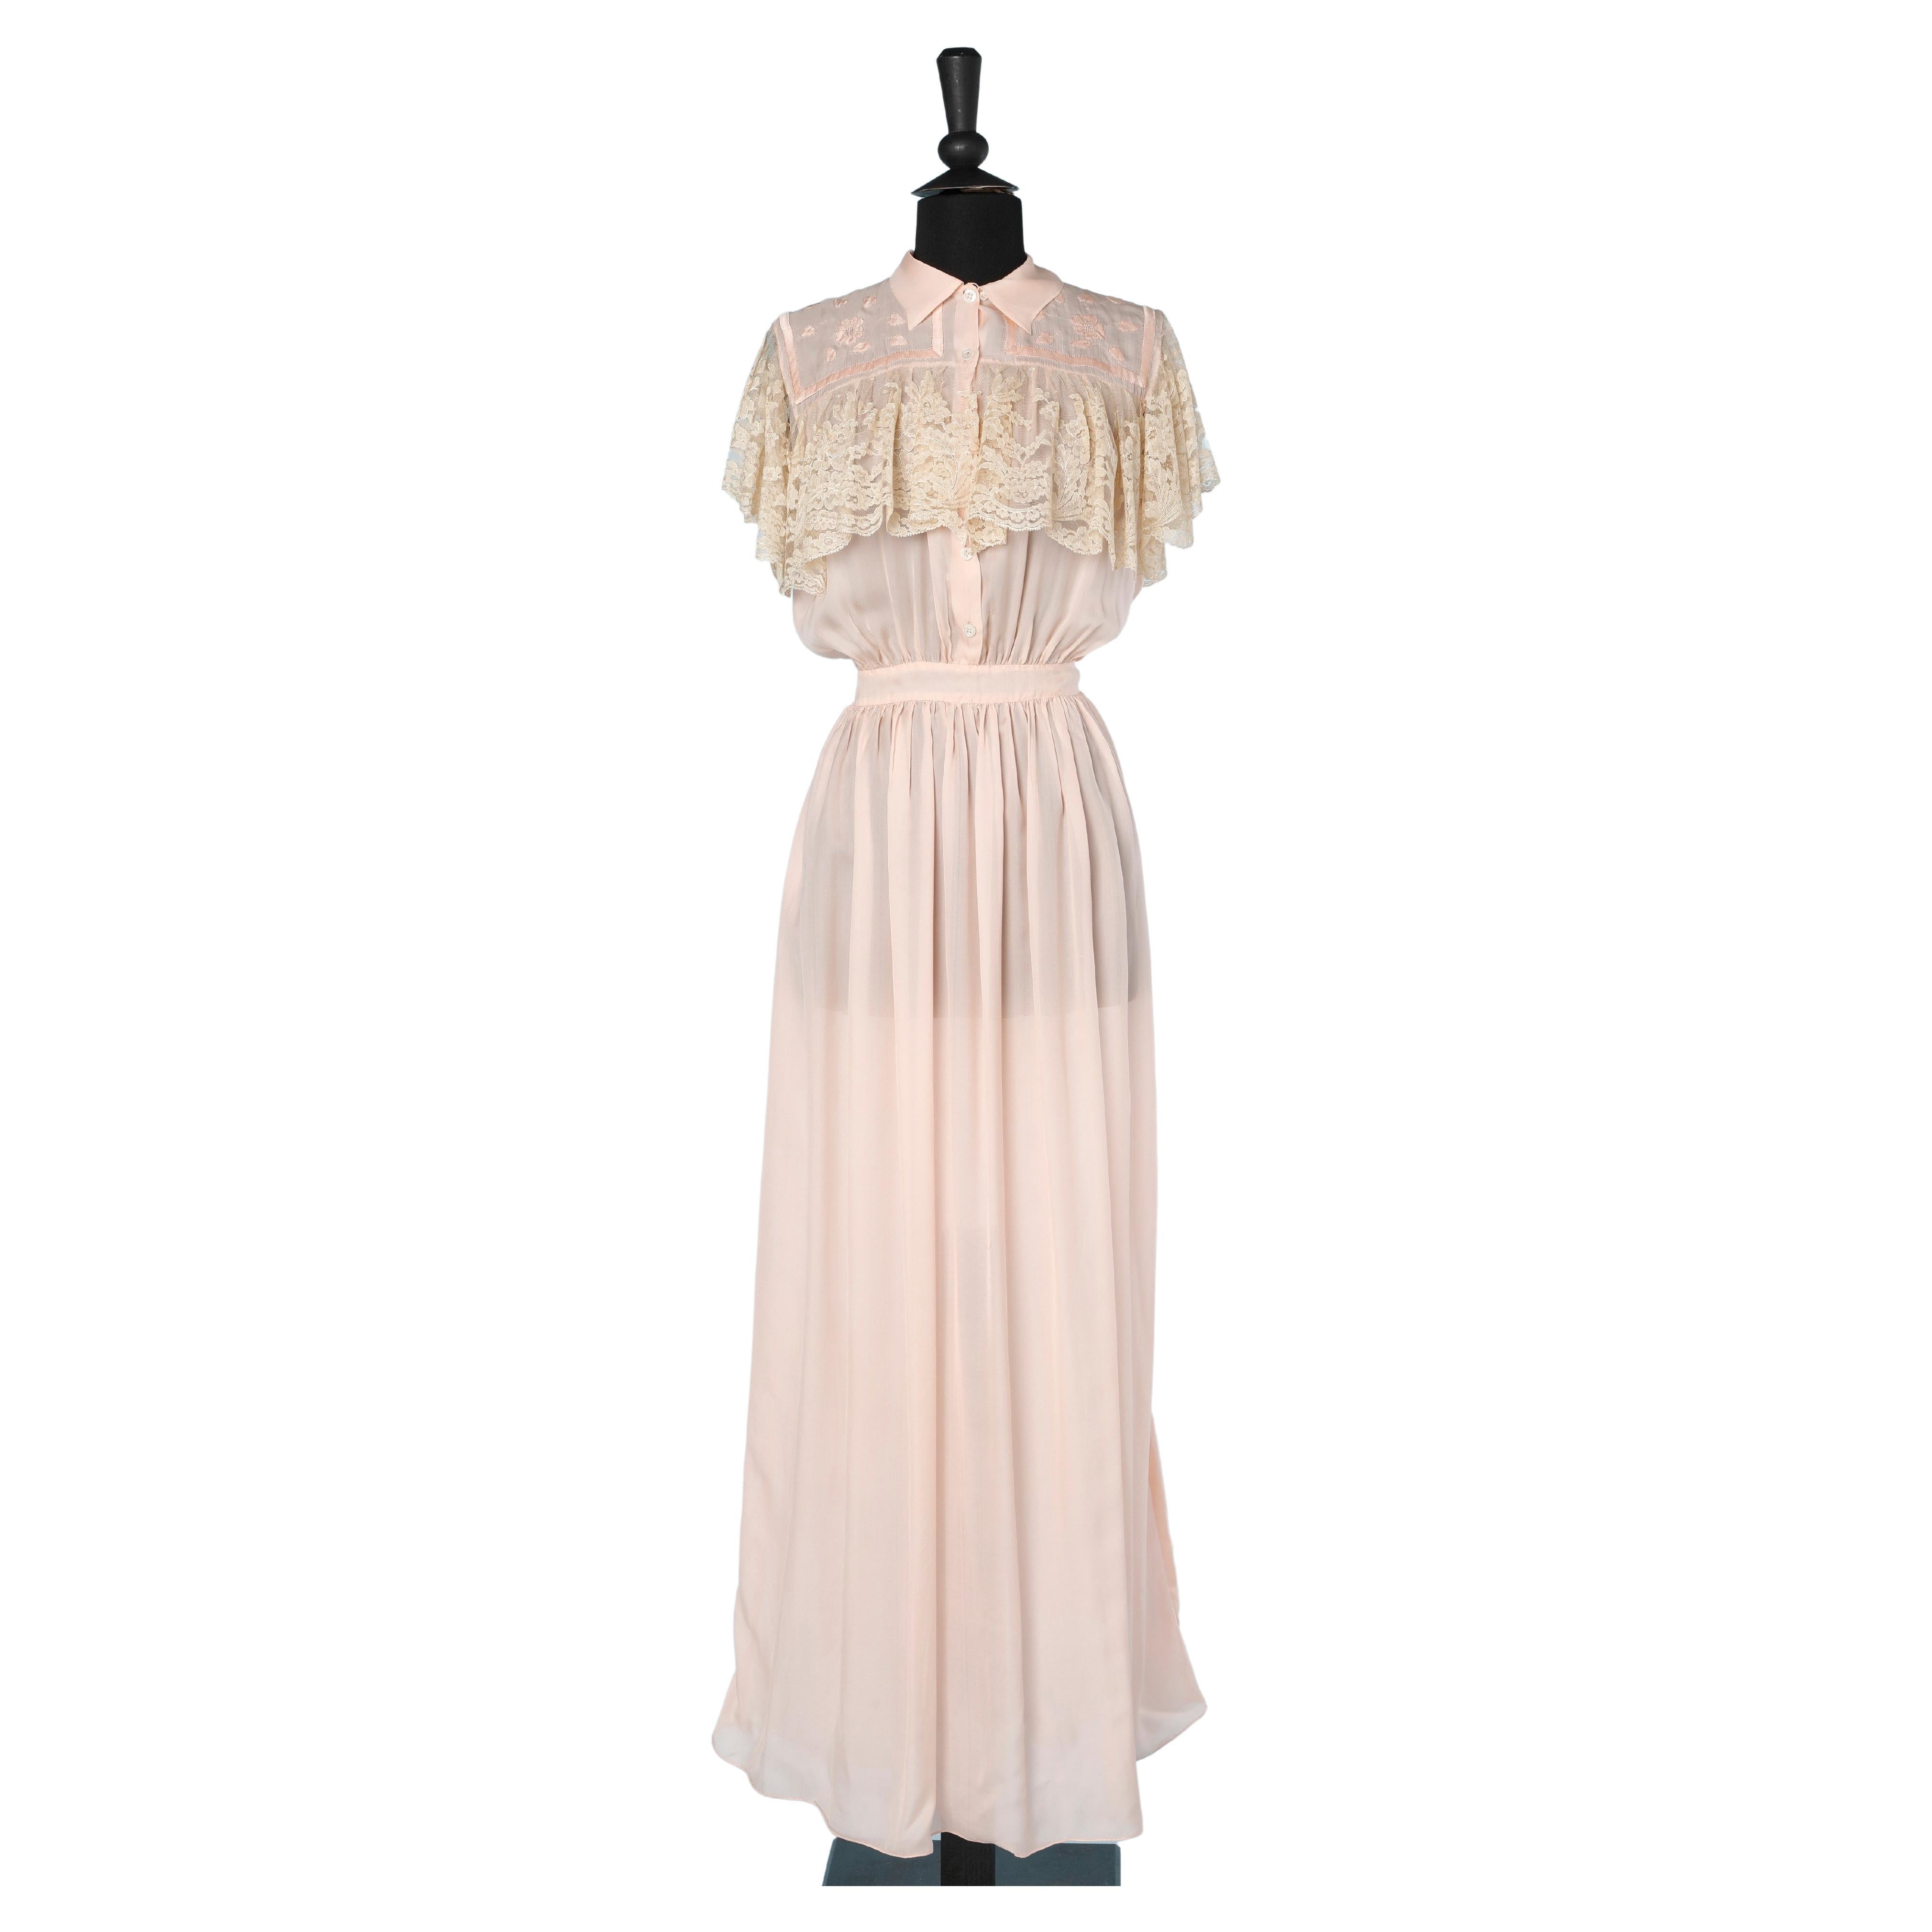 1930's deshabillé in pale pink silk and lace 